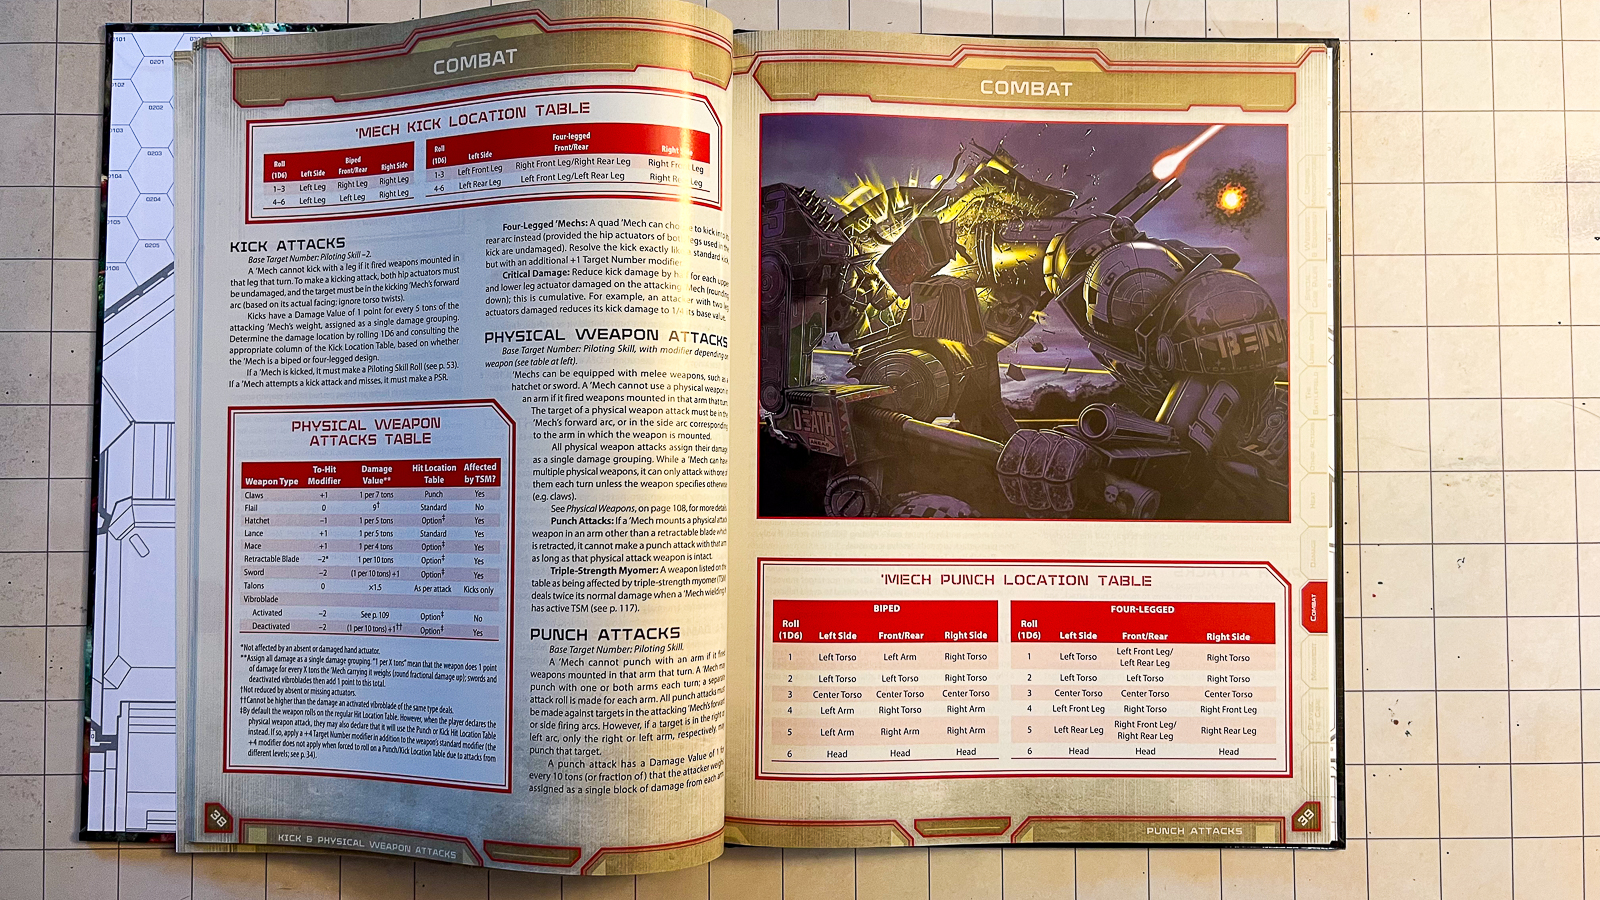 An image of the Battletech Mech Manual featuring melee combat rules